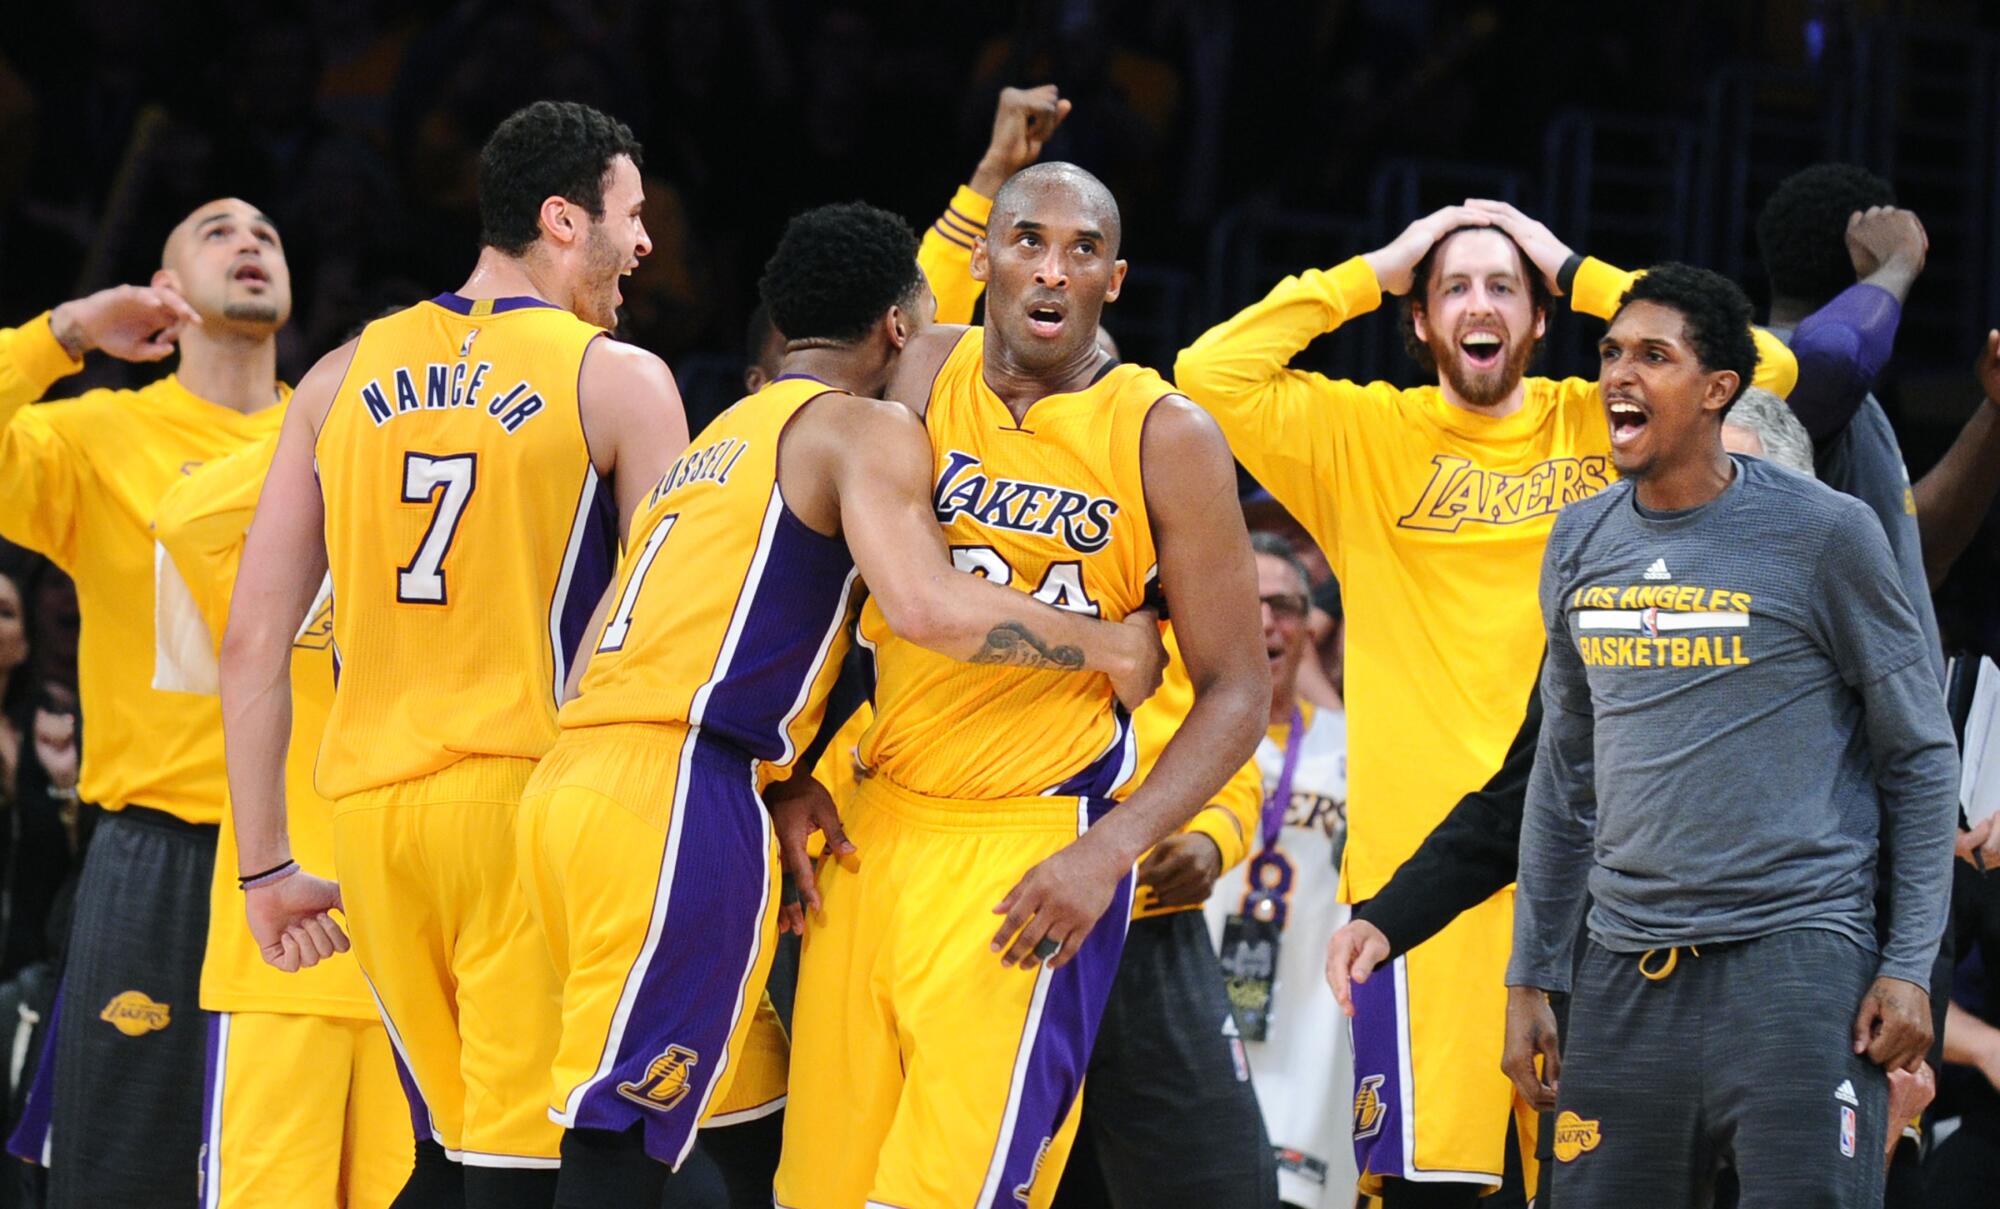 Lakers guard Kobe Bryant is mobbed by teammates after scoring 60 points in his final NBA game.